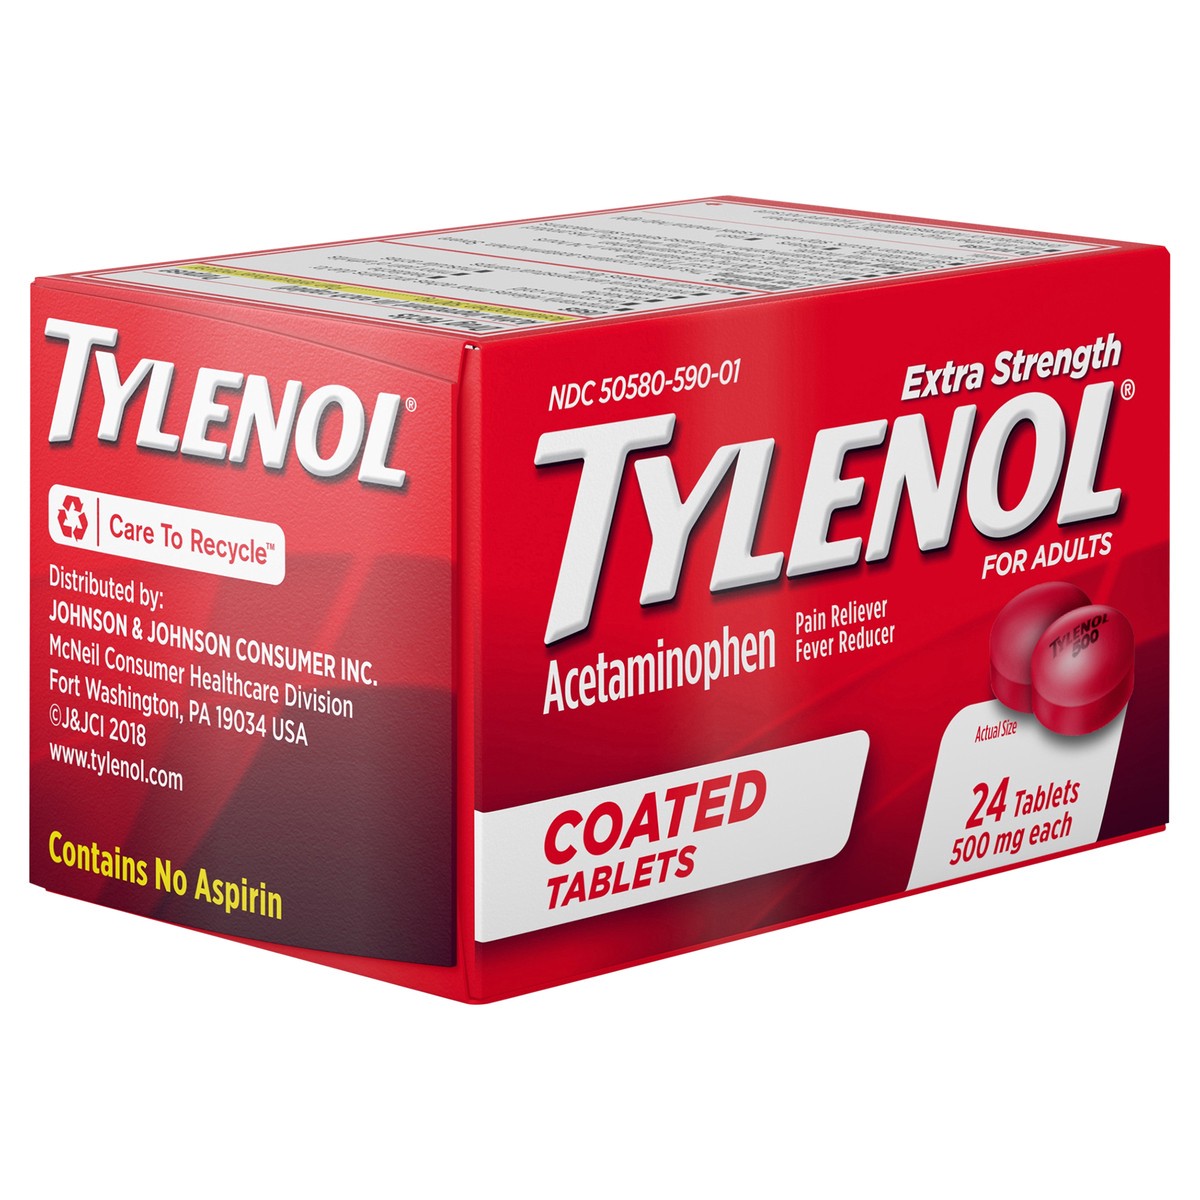 slide 7 of 7, Tylenol Extra Strength Pain Relief Coated Tablets for Adults, 500mg Acetaminophen Pain Reliever and Fever Reducer per Tablet for Minor Aches, Pains, and Headaches, 24 ct, 24 ct